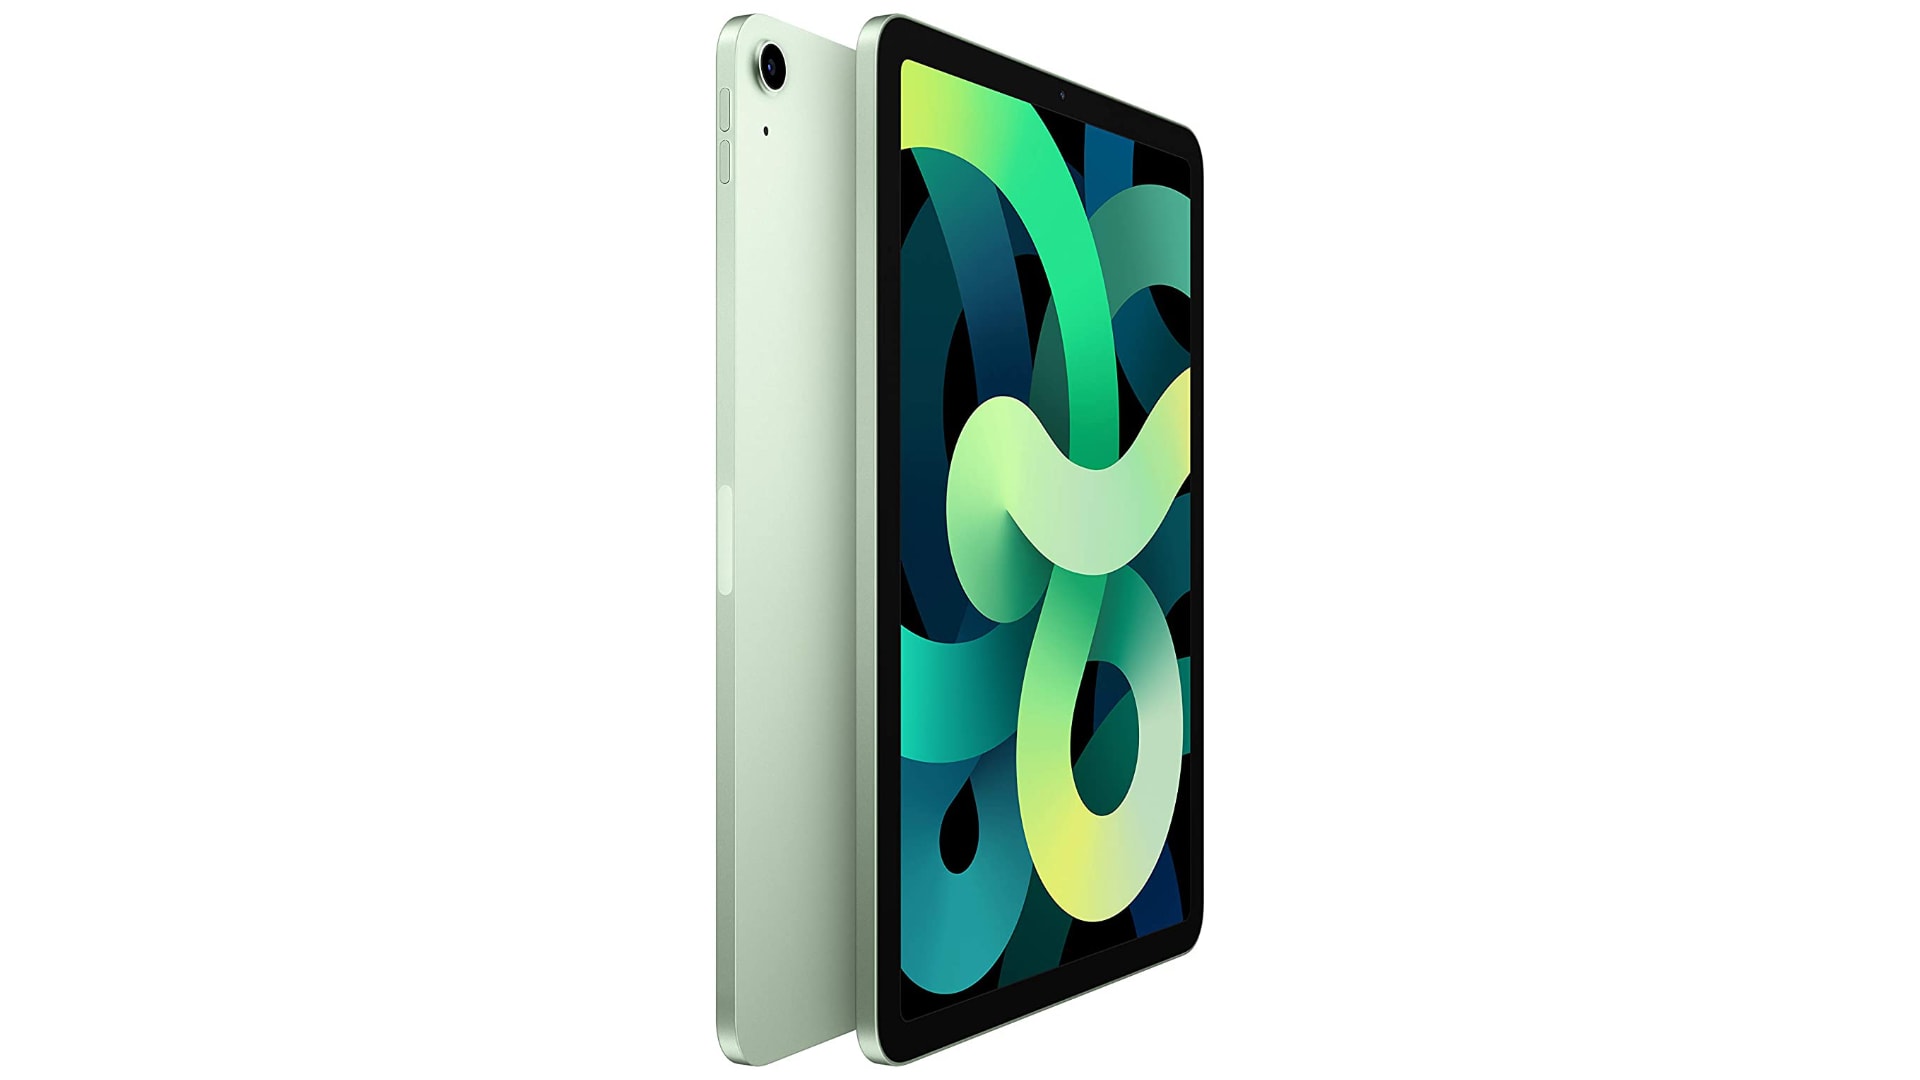 Apple S Newest Ipad Air Gets Its Biggest Price Cut Yet